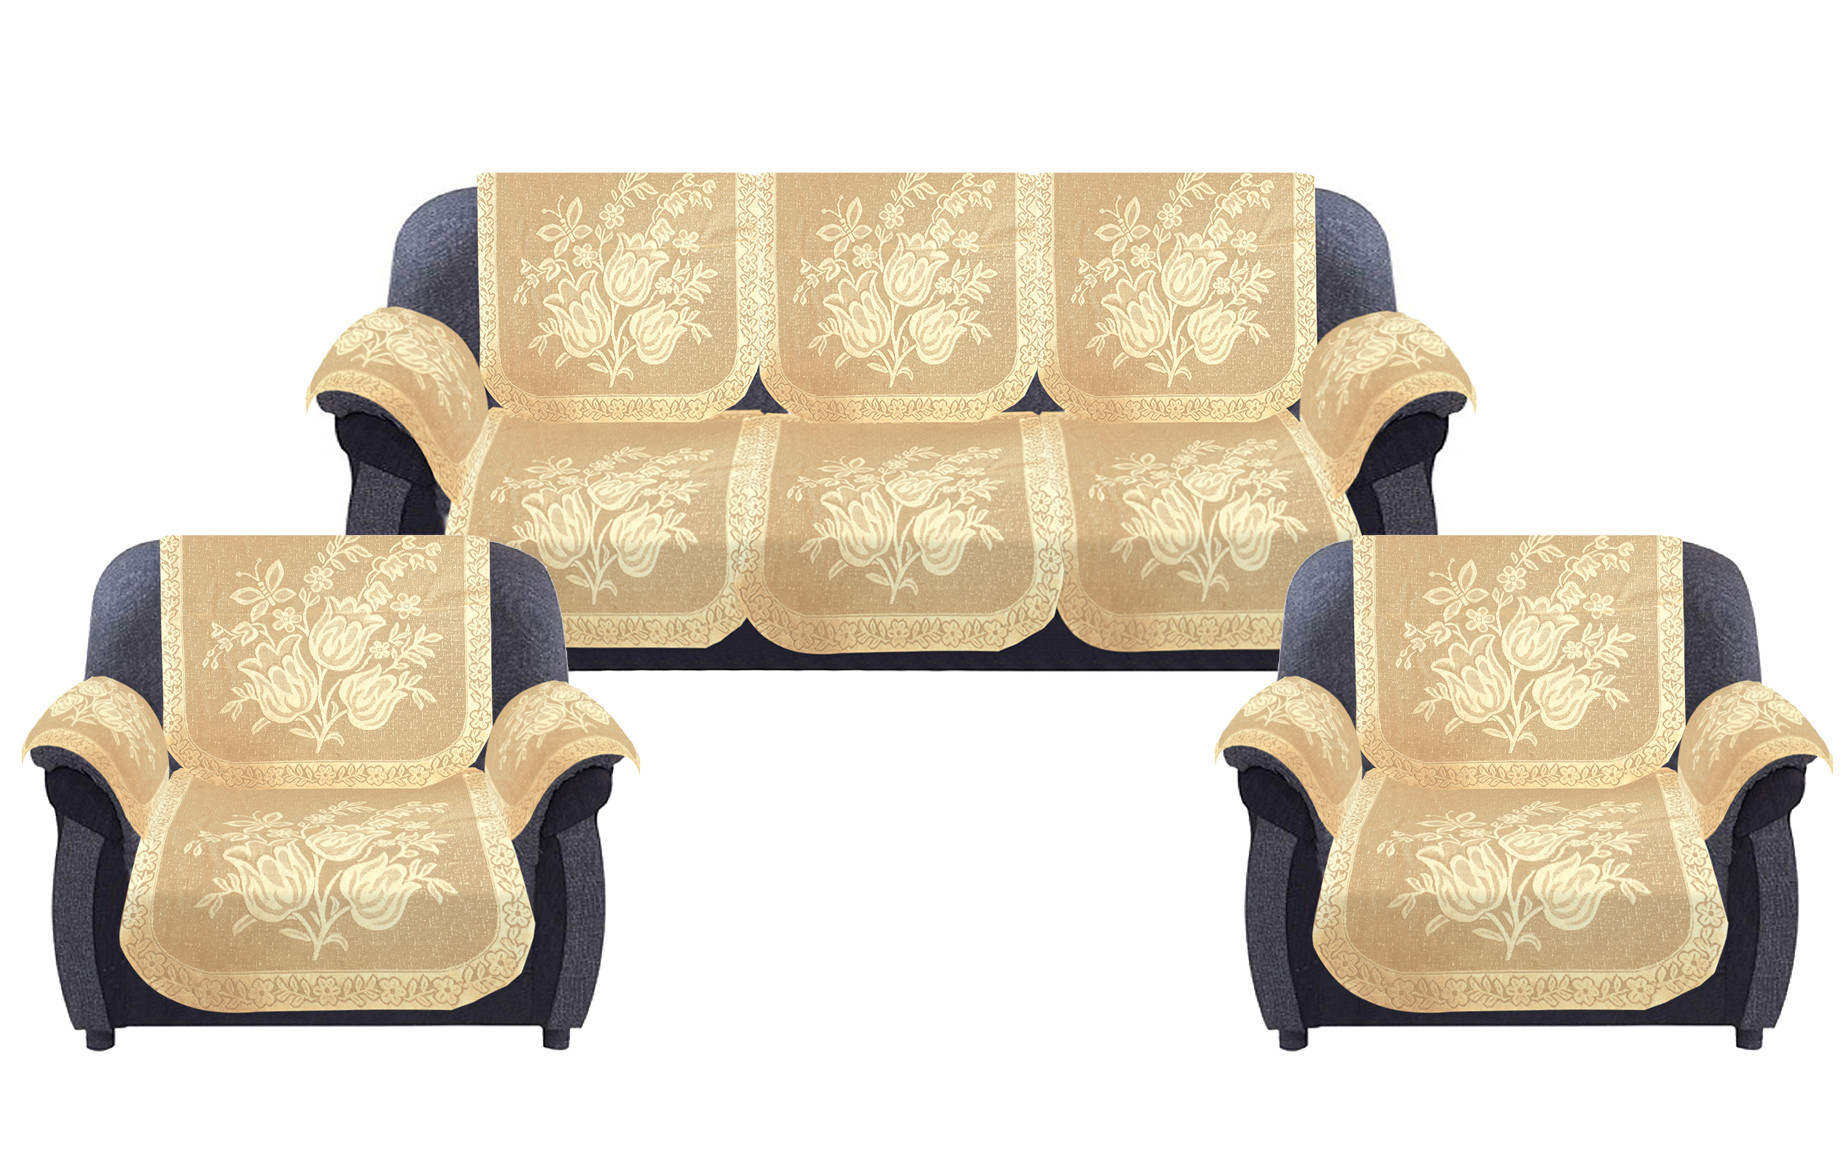 Kuber Industries Flower Printed 5 Seater Cotton Sofa Cover Set with 6 Pieces Arms Cover (Cream)-44KM0585